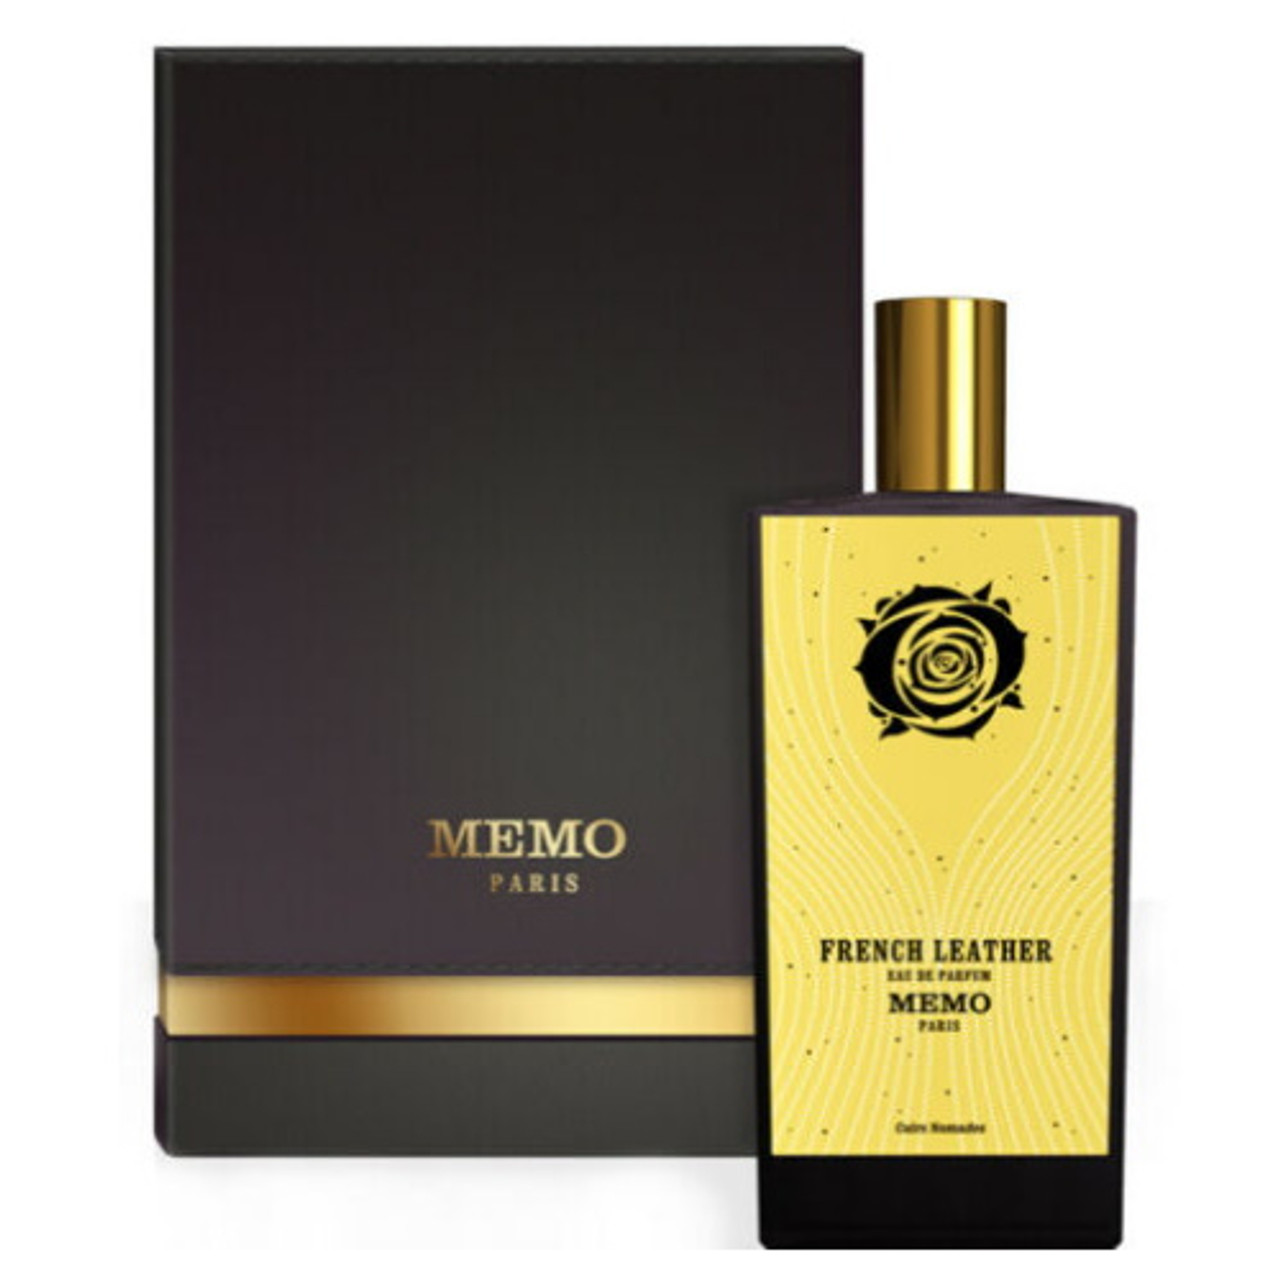 Memo Paris French Leather Cuirs Nomades, edp 75ml - Teszter